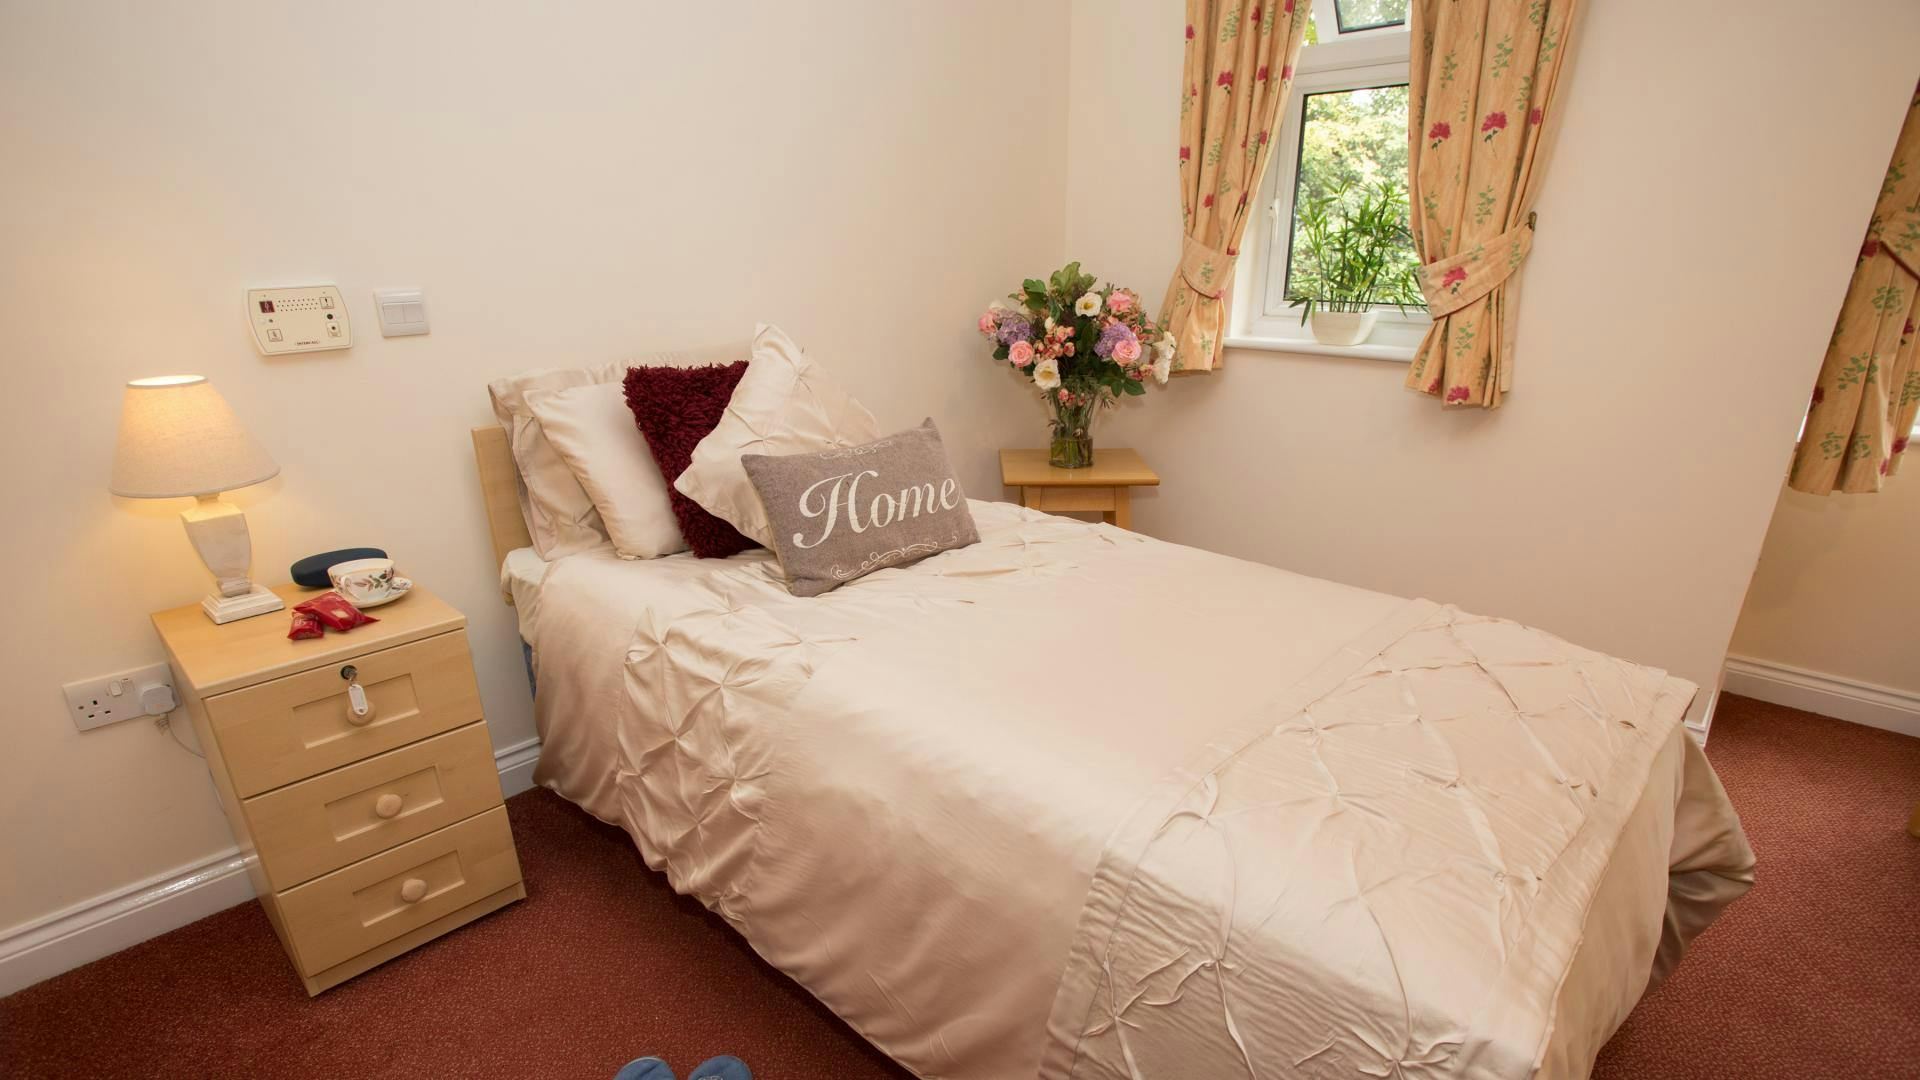 Bedroom at The Meadows Care Home in Didcot, Oxfordshire